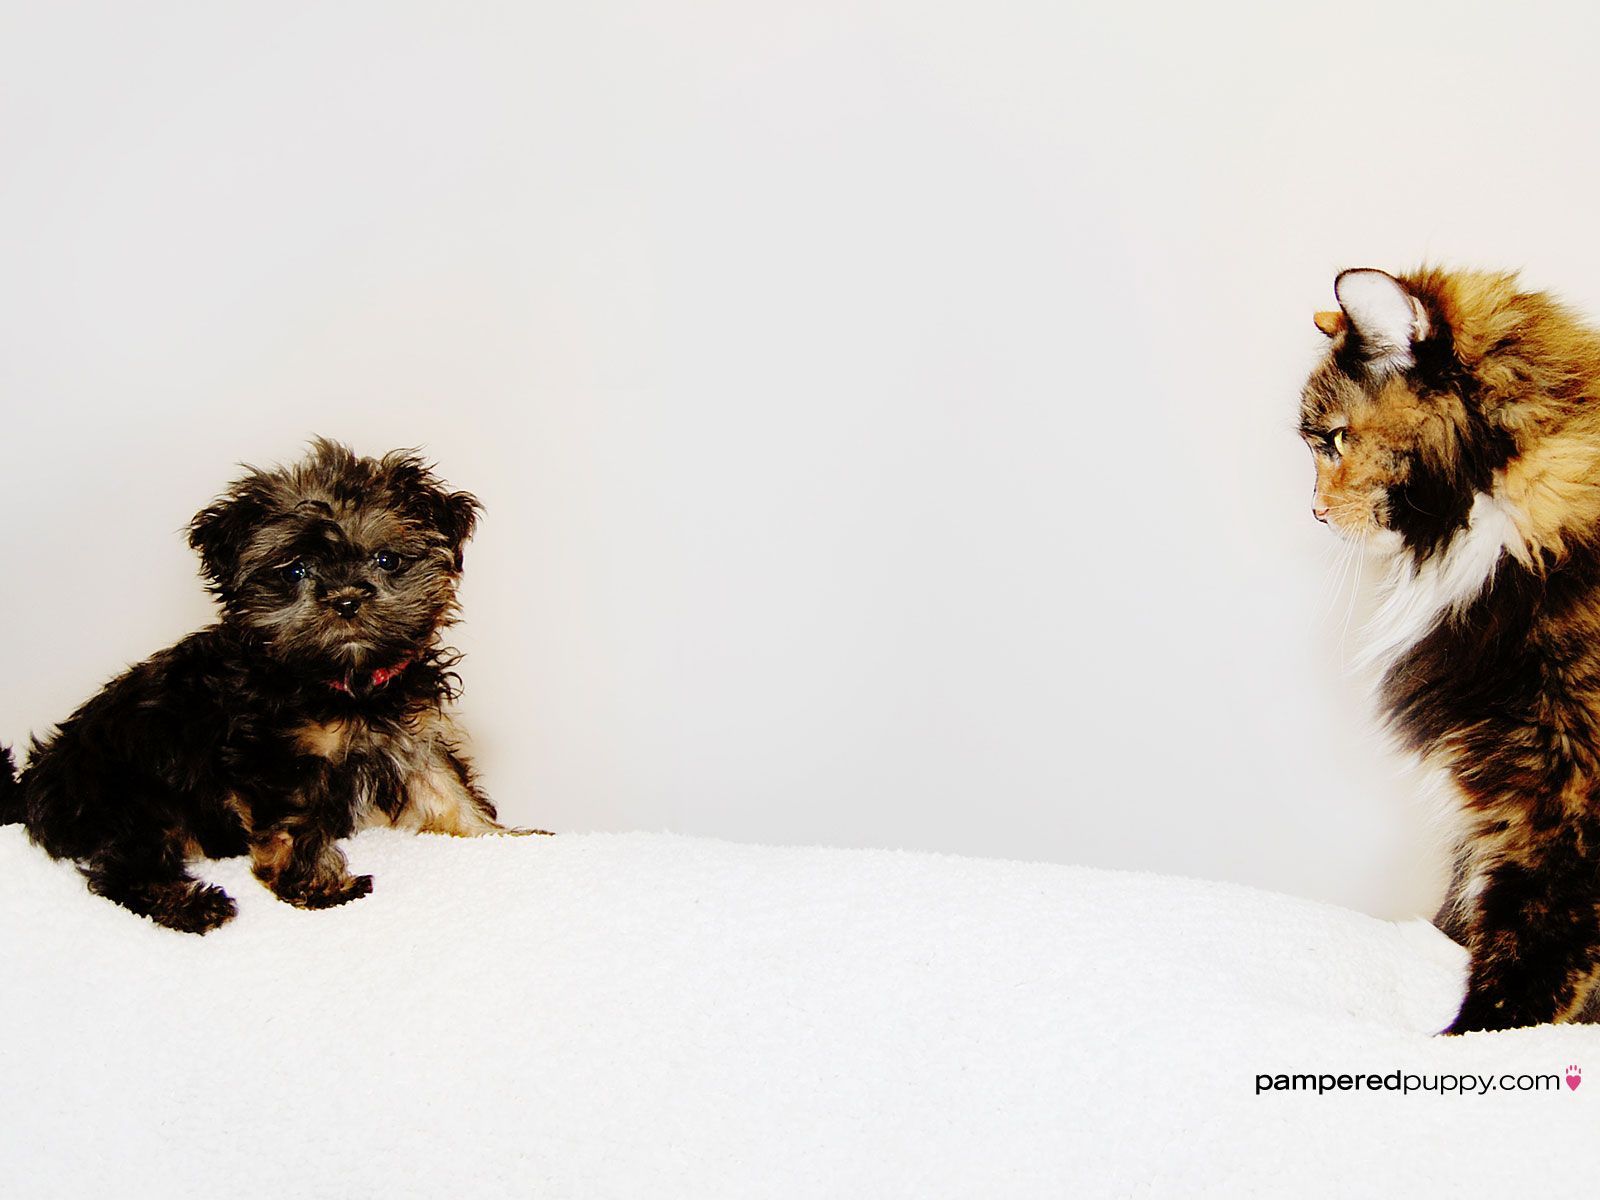 The staredown: tiny shih tzu/yorkie puppy and adult cat | Doggy ...